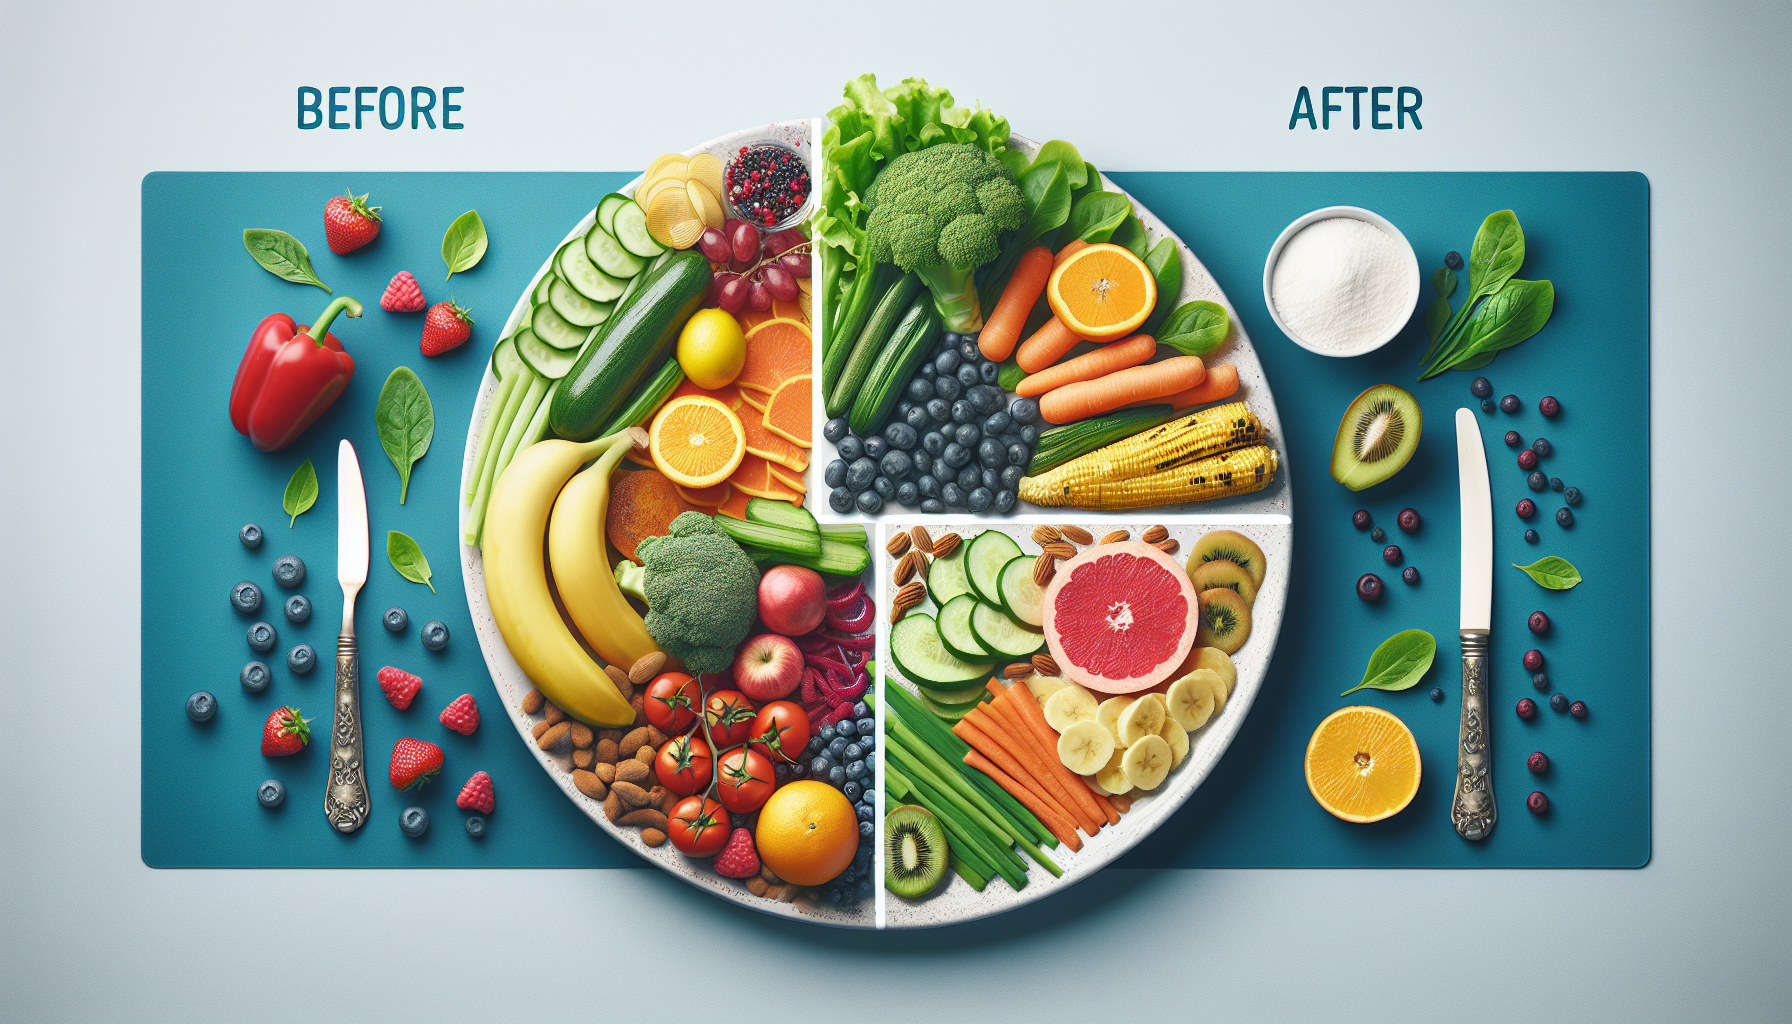 Can You Reverse Diabetes With This Simple Diet Change?